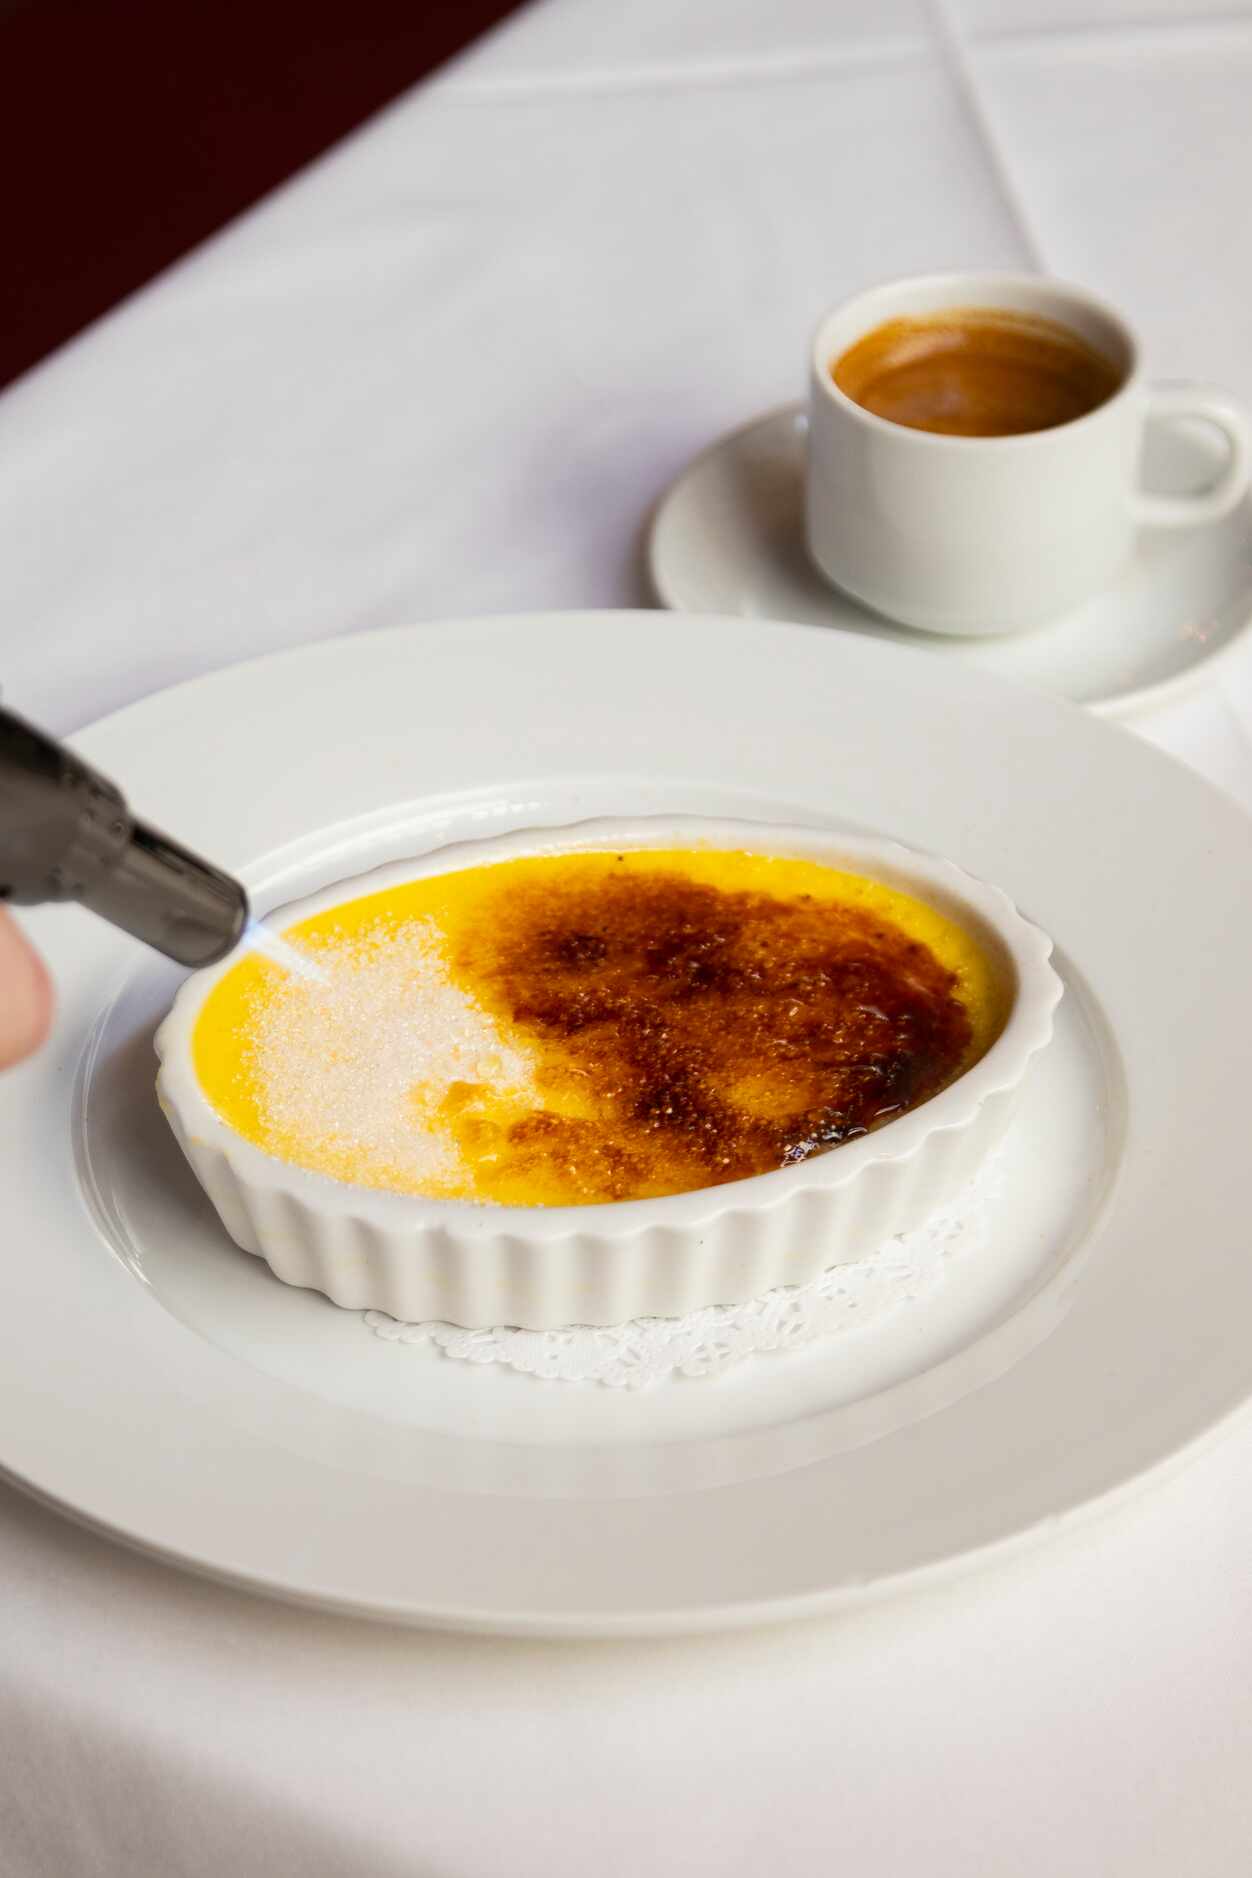 Crème brûlée with espresso is a classic way to end dinner at St. Martin's Wine Bistro in...